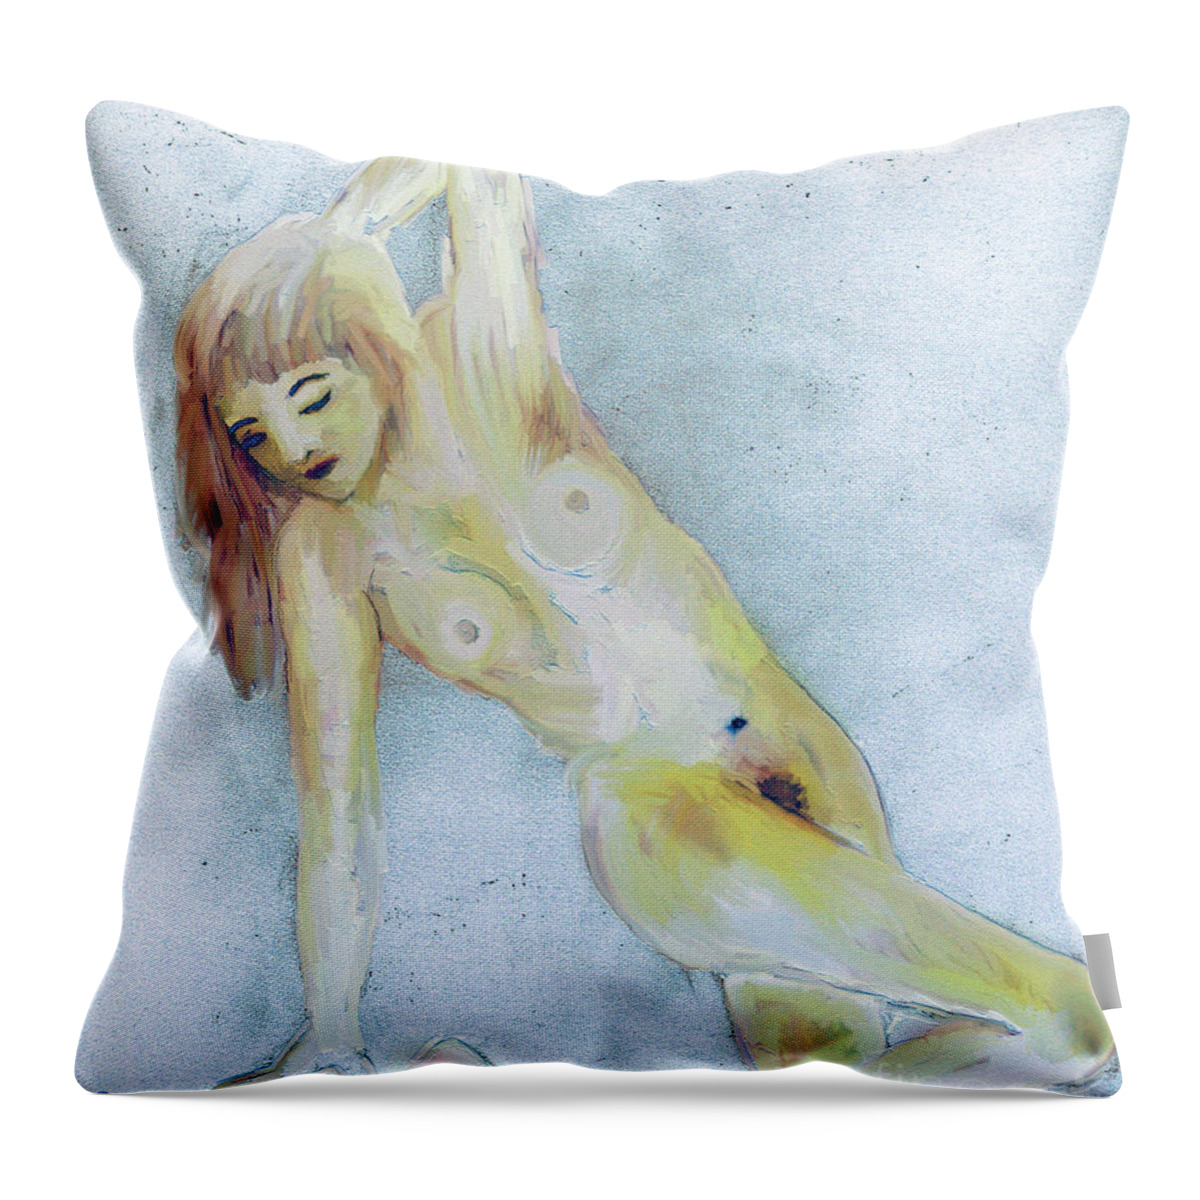 Female Nude Throw Pillow featuring the digital art Morning Stretch #1 by Shelley Jones